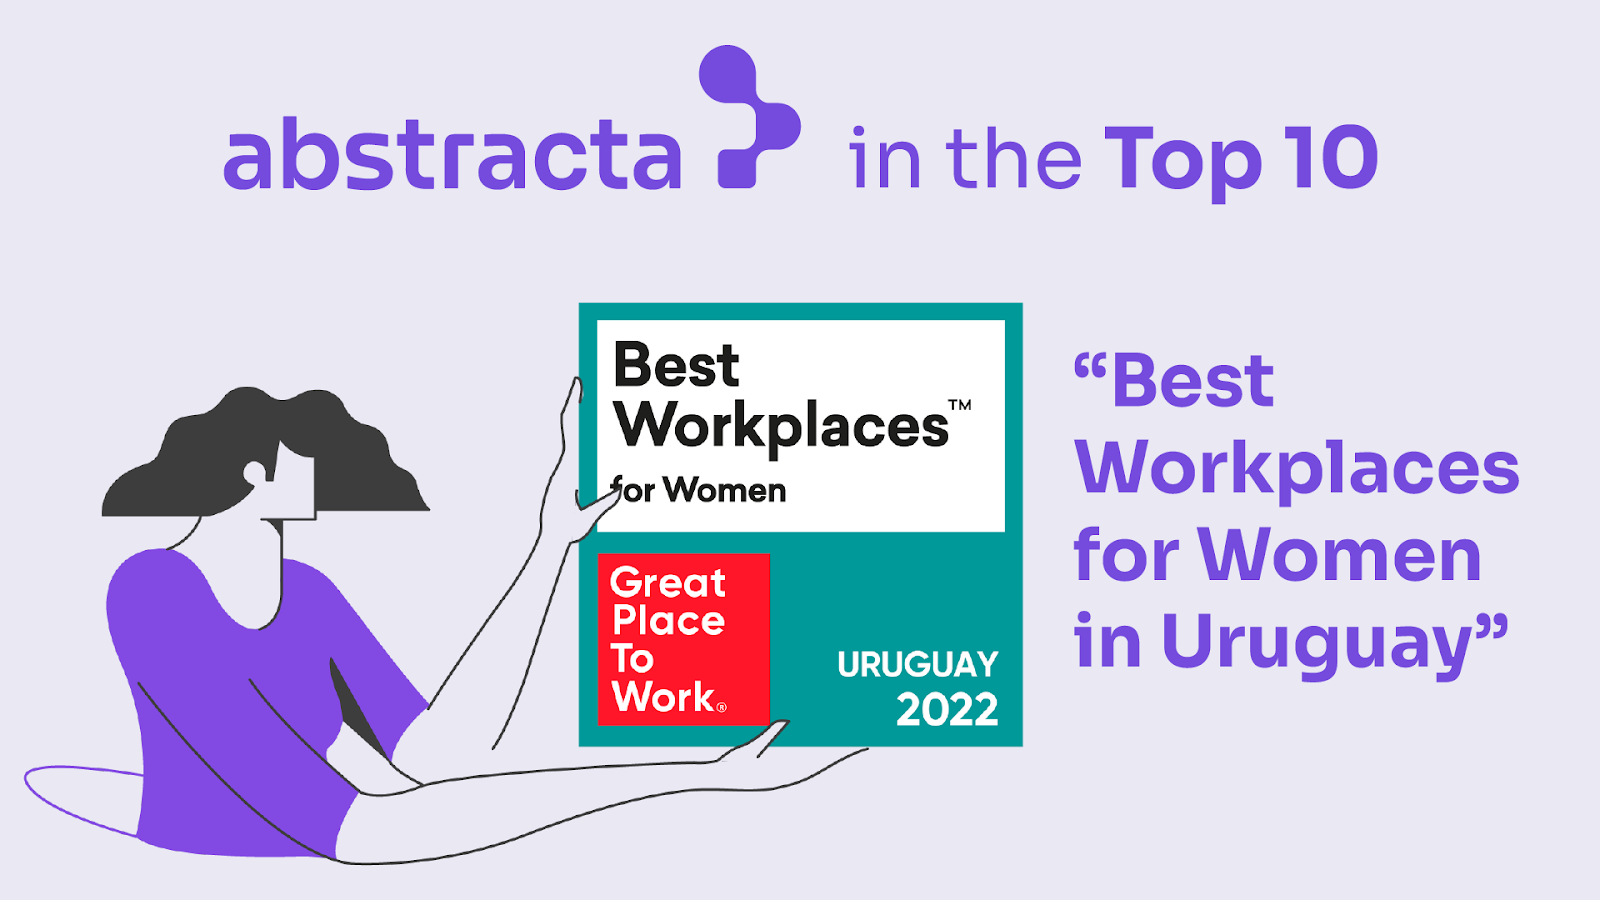 Abstracta in the Top 10"Best Workplaces for Women in Uruguay"